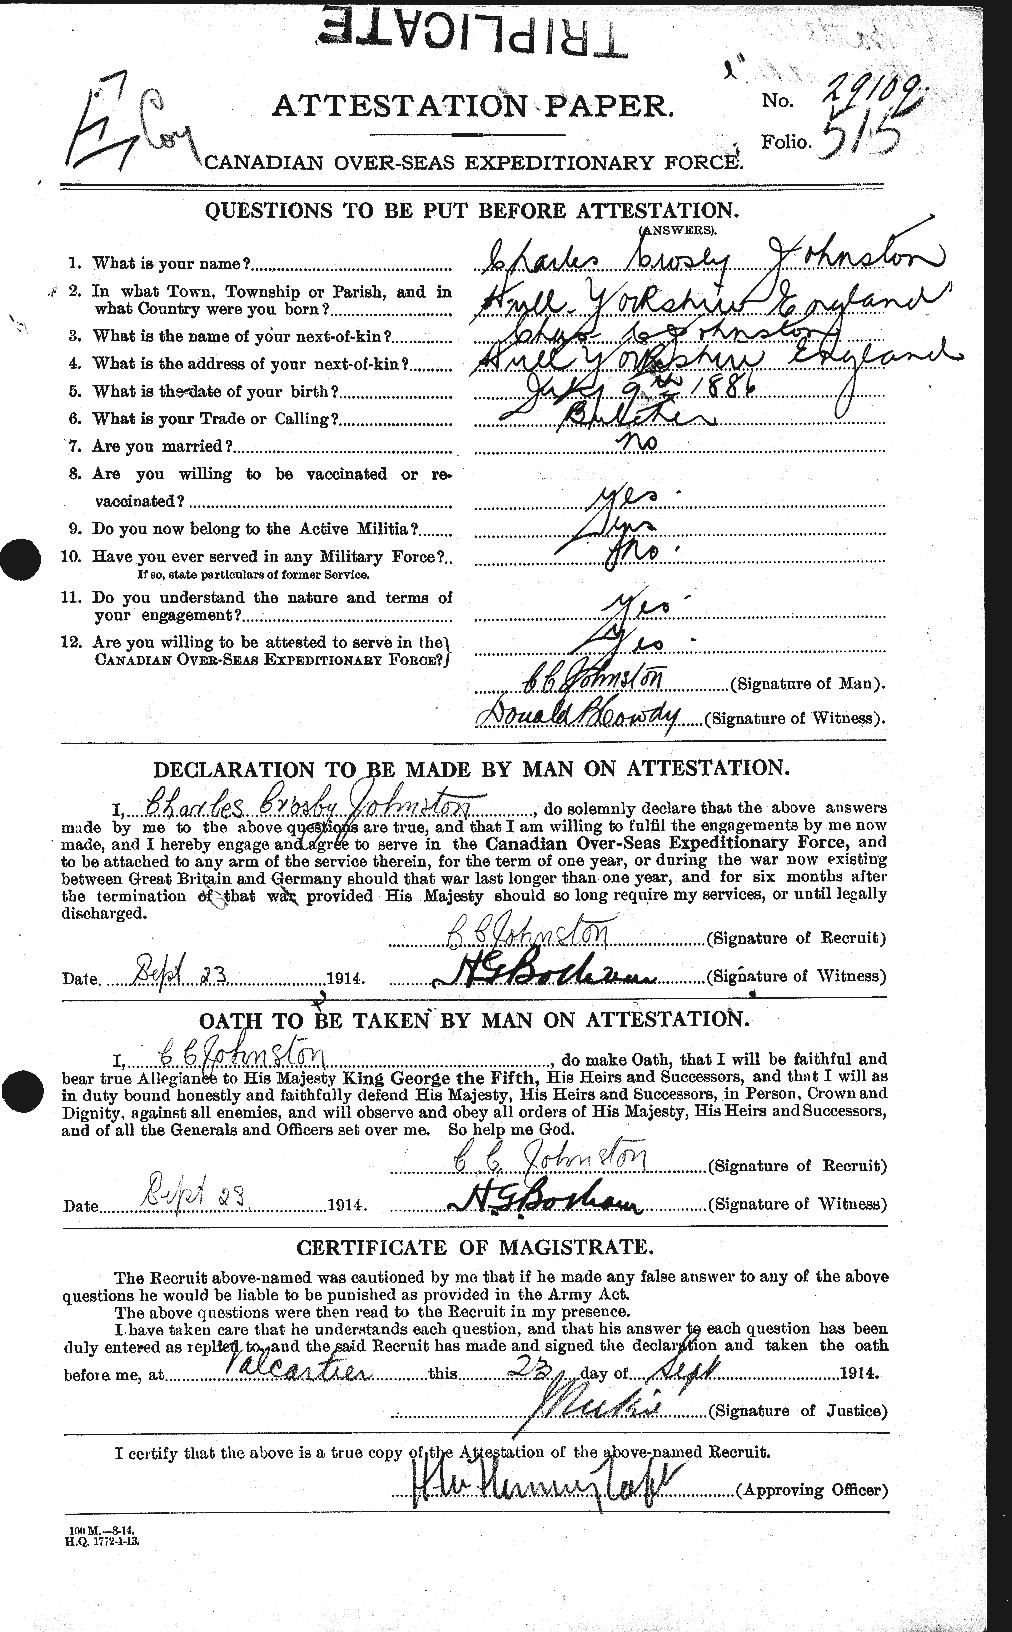 Personnel Records of the First World War - CEF 423099a